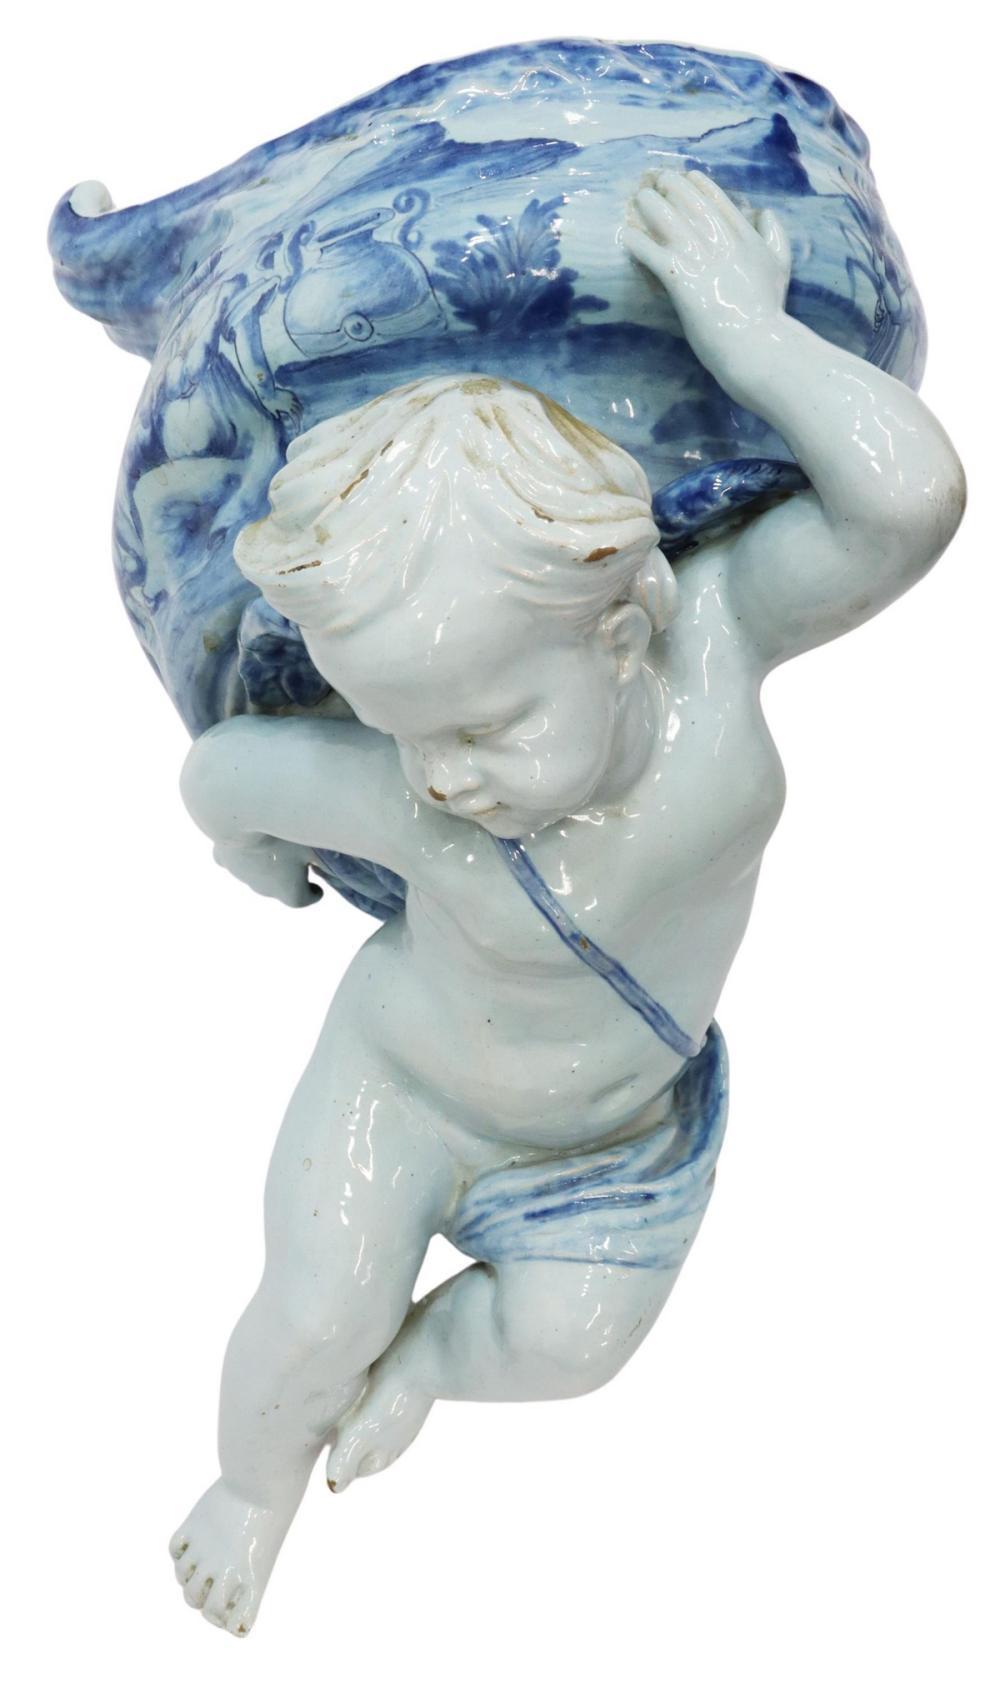 Stunning Italian blue and white majolica wall-mounted jardiniere, by Ulisse Cantagalli, Florence, 19th c., modeled as a winged putto, supporting a shell-form vessel, painted with scene of woman and cherubs, cockerel/ rooster mark at interior.